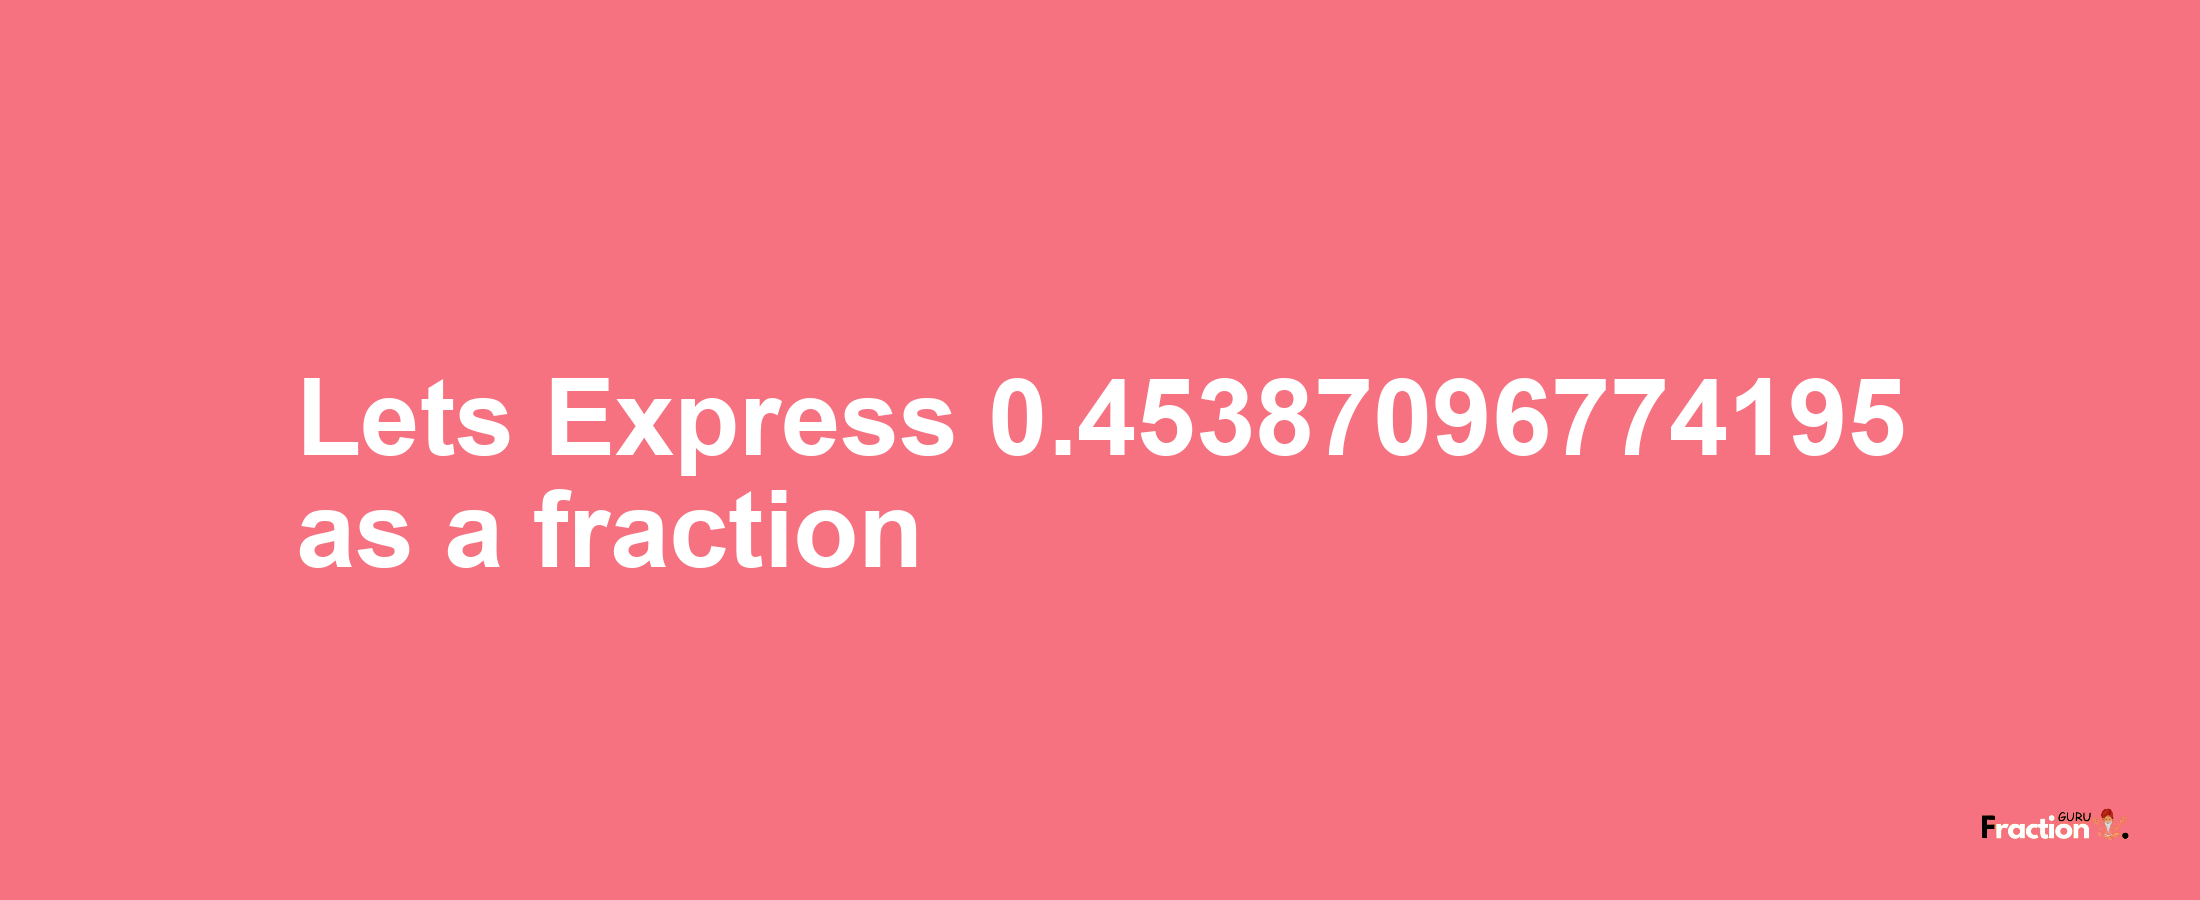 Lets Express 0.45387096774195 as afraction